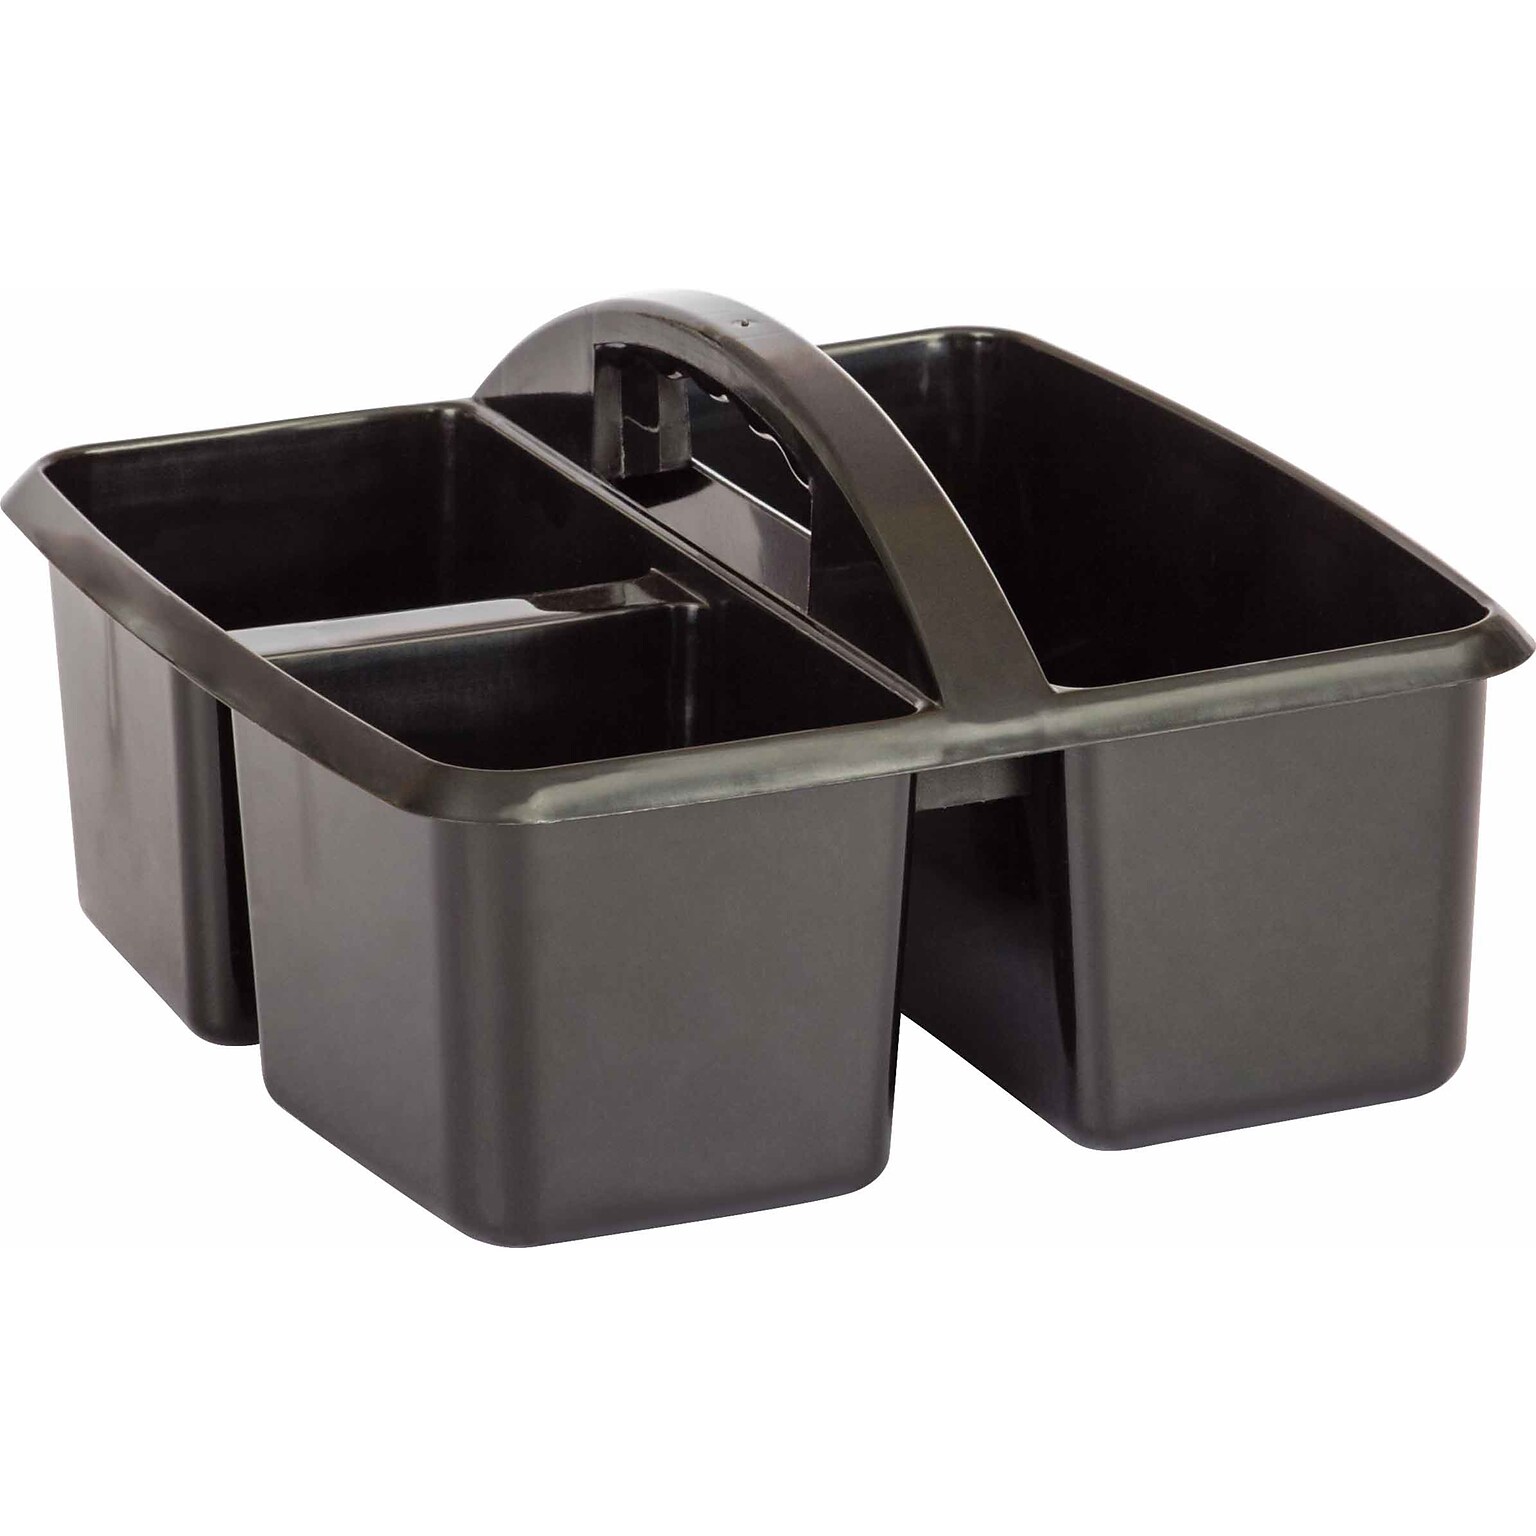 Teacher Created Resources Black Plastic Storage Caddy, Pack of 6 (TCR20902BN)